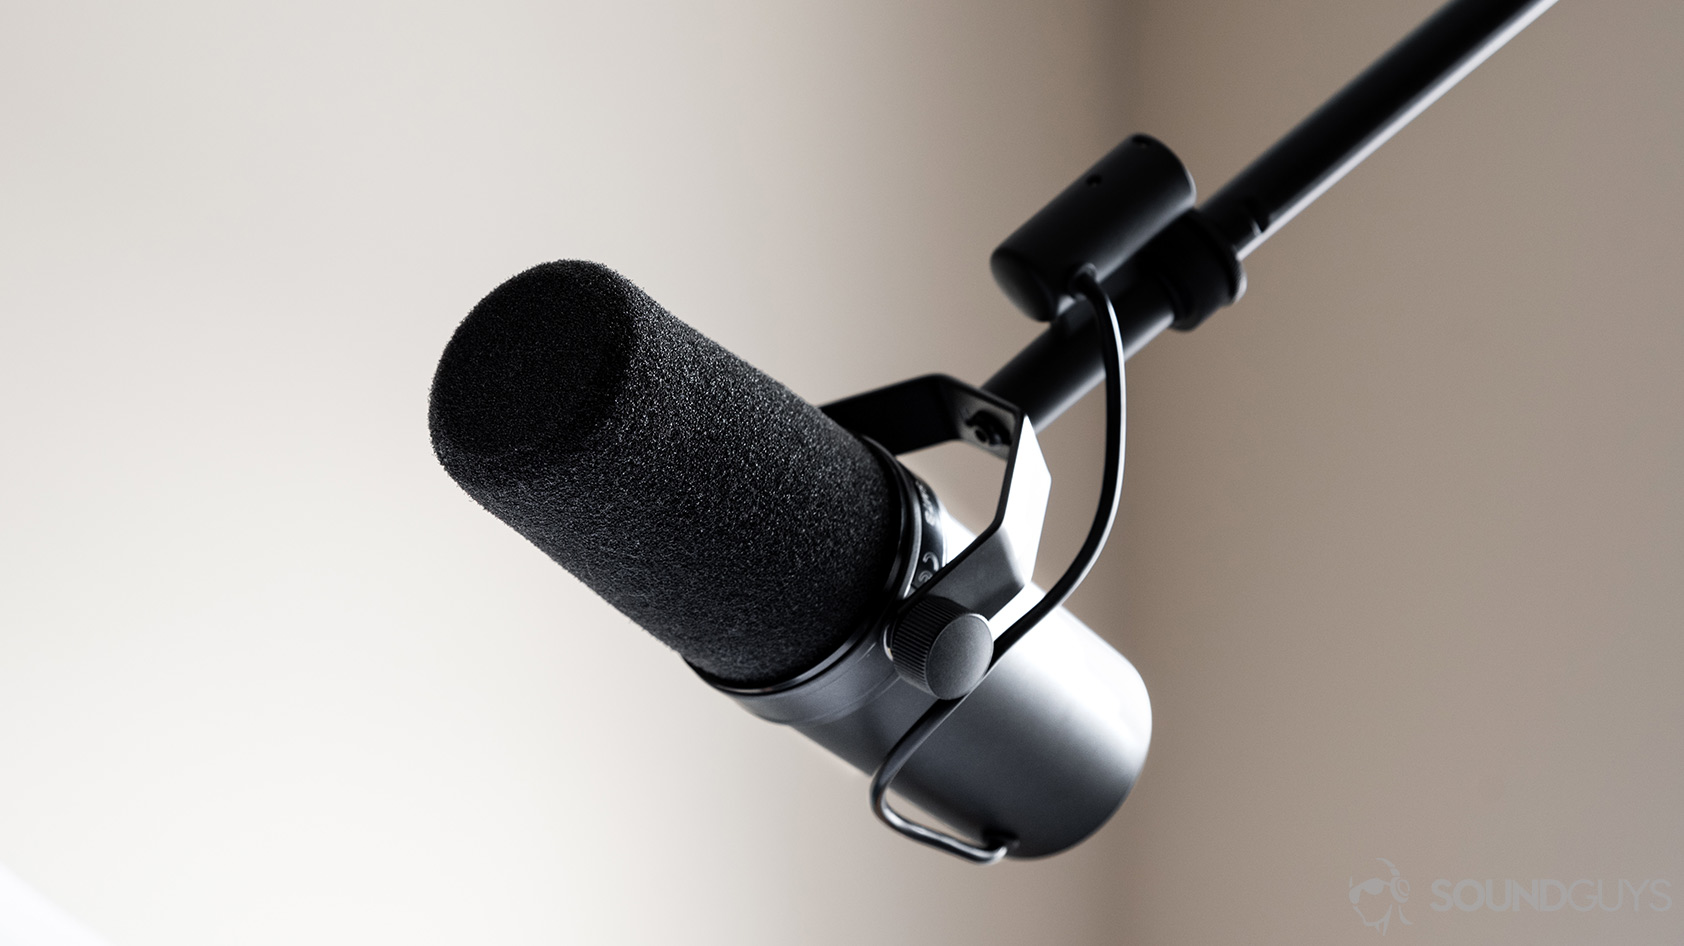 Nathaniel Ward Implement Planned Shure SM7B review - SoundGuys